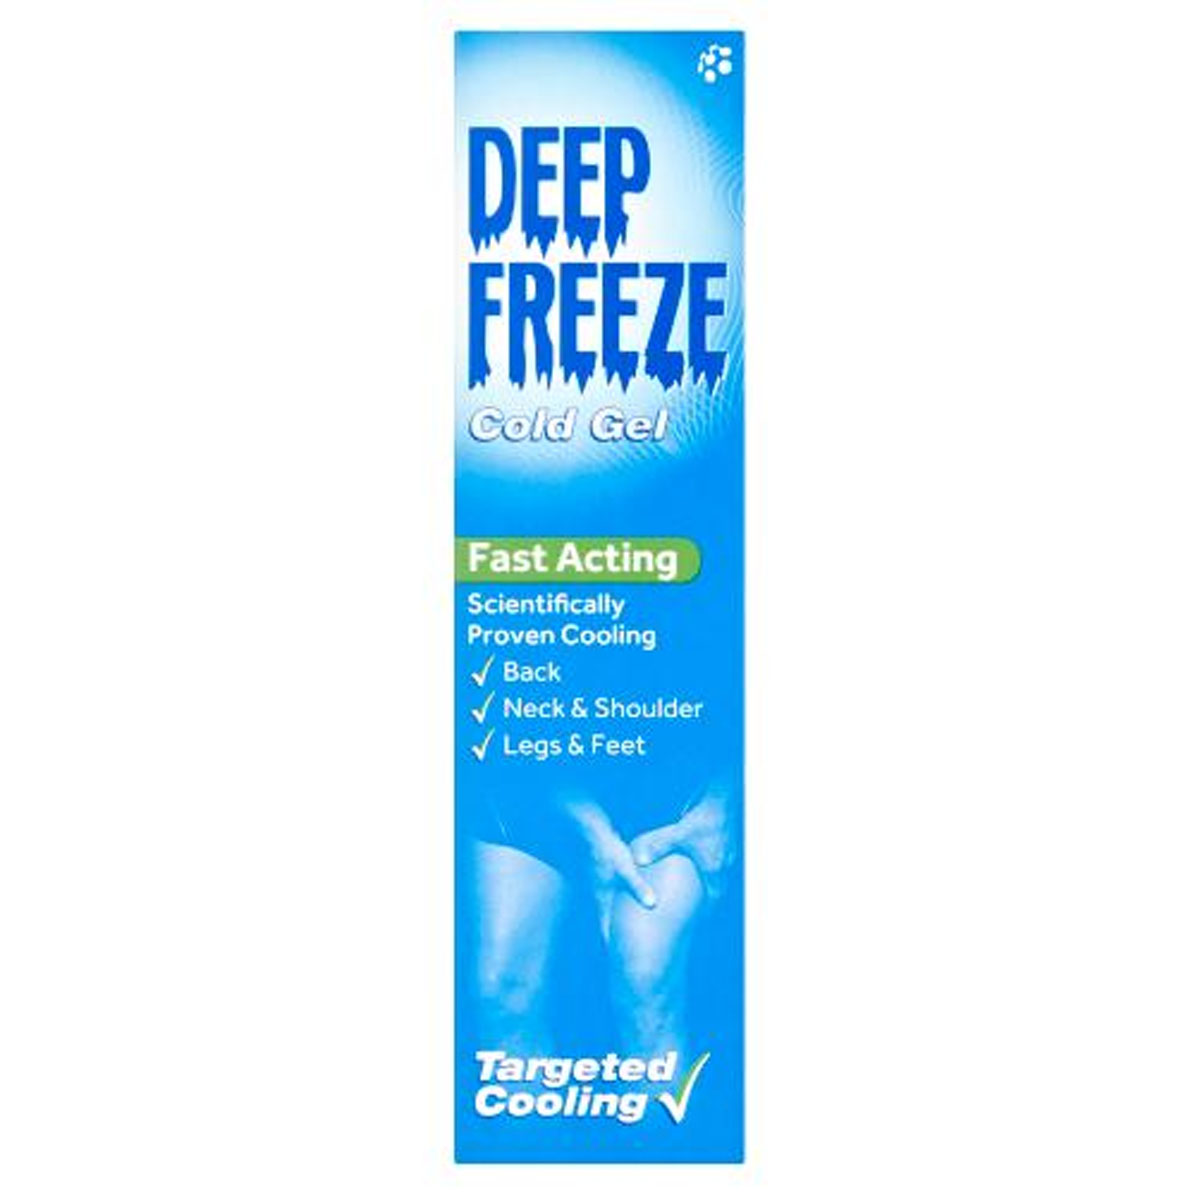 Deep Freeze - Cold Gel - 35g - Continental Food Store